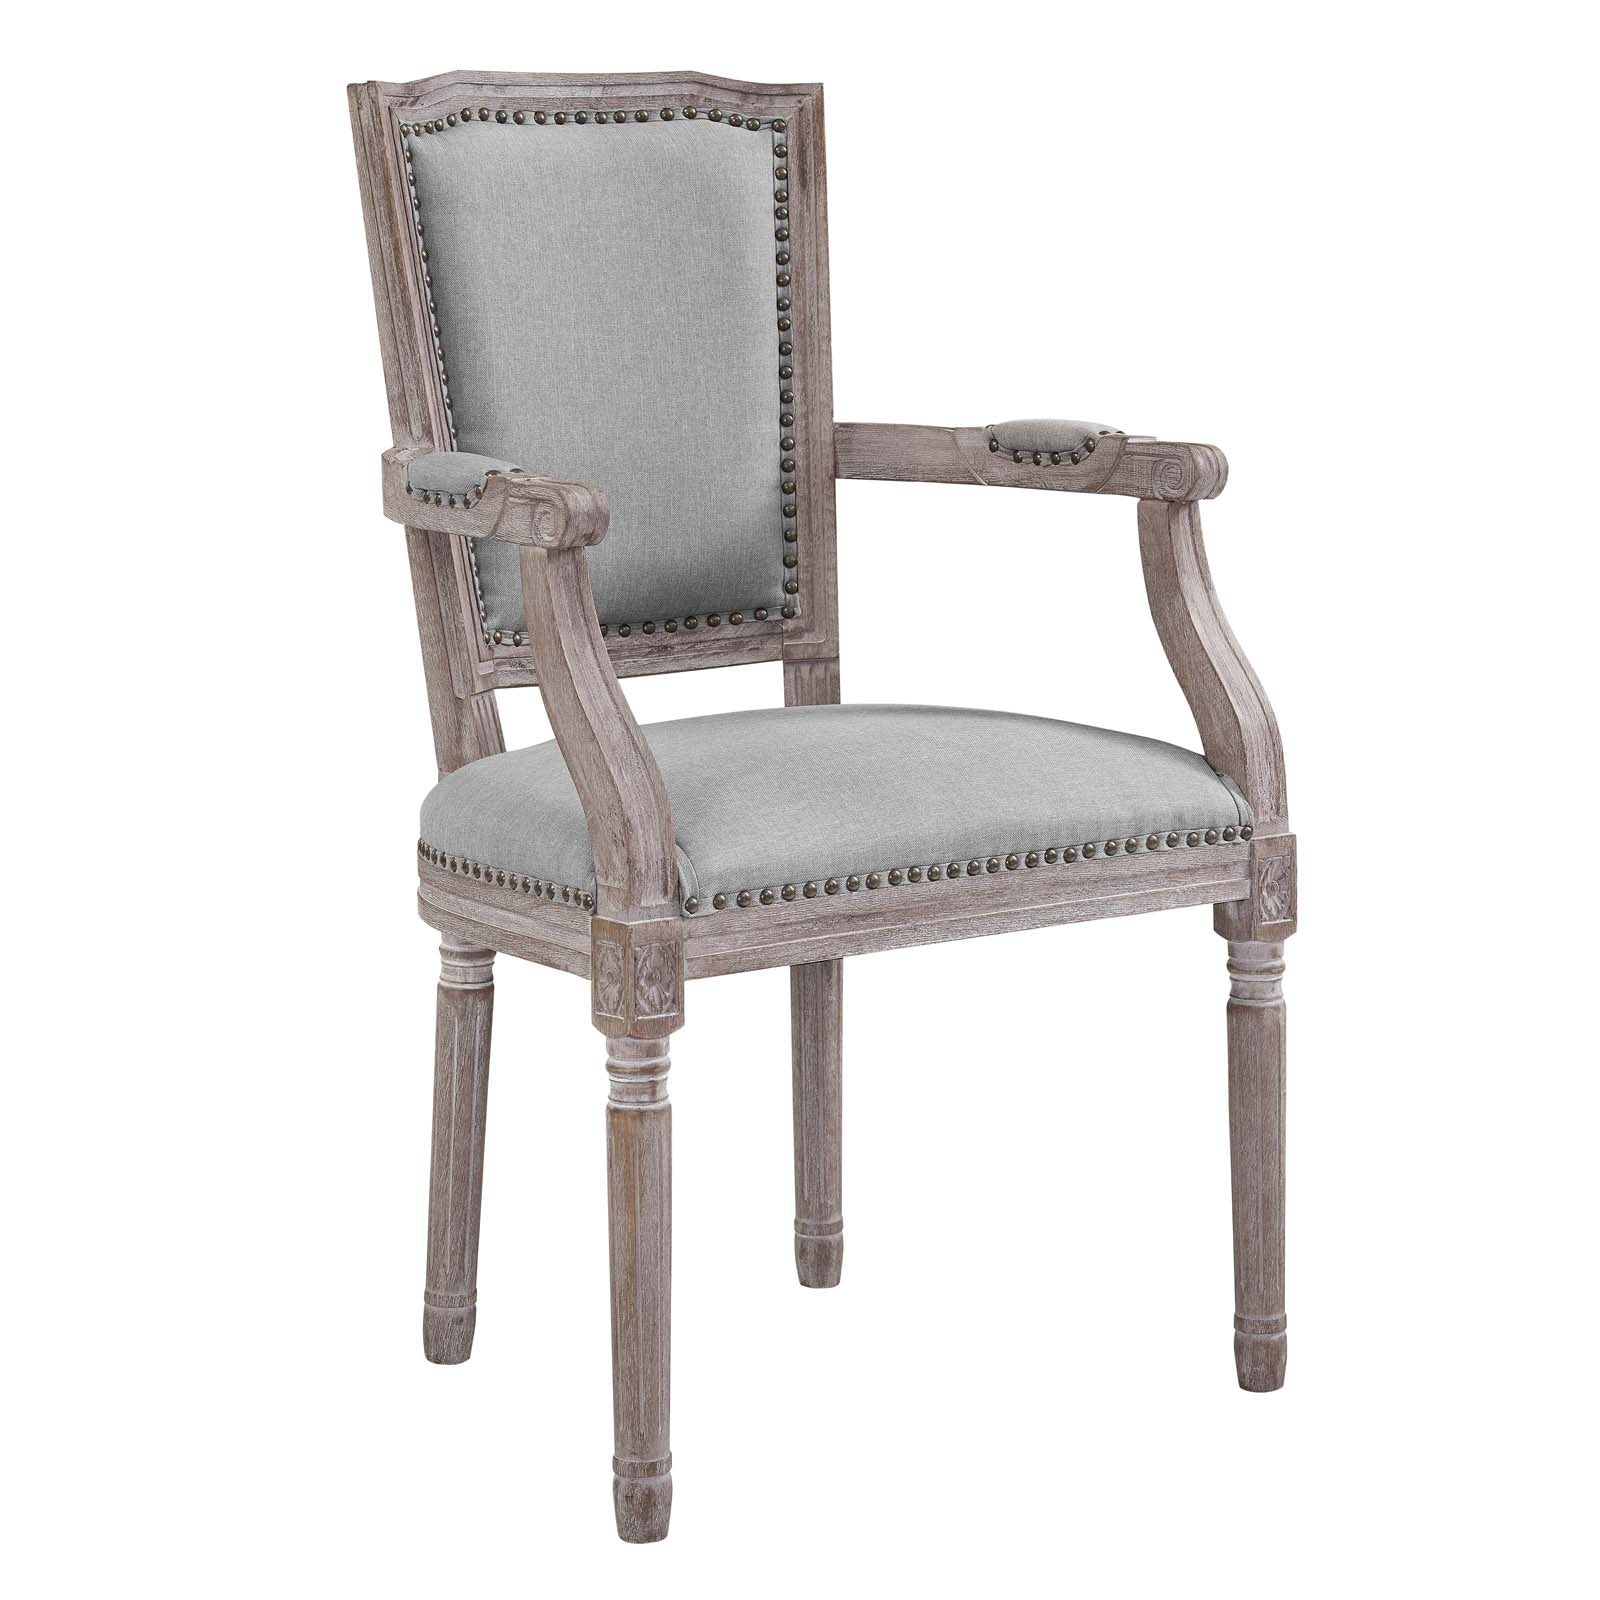 Modway Dining Chairs - Penchant Dining Armchair Upholstered Fabric (Set of 4) Light Gray